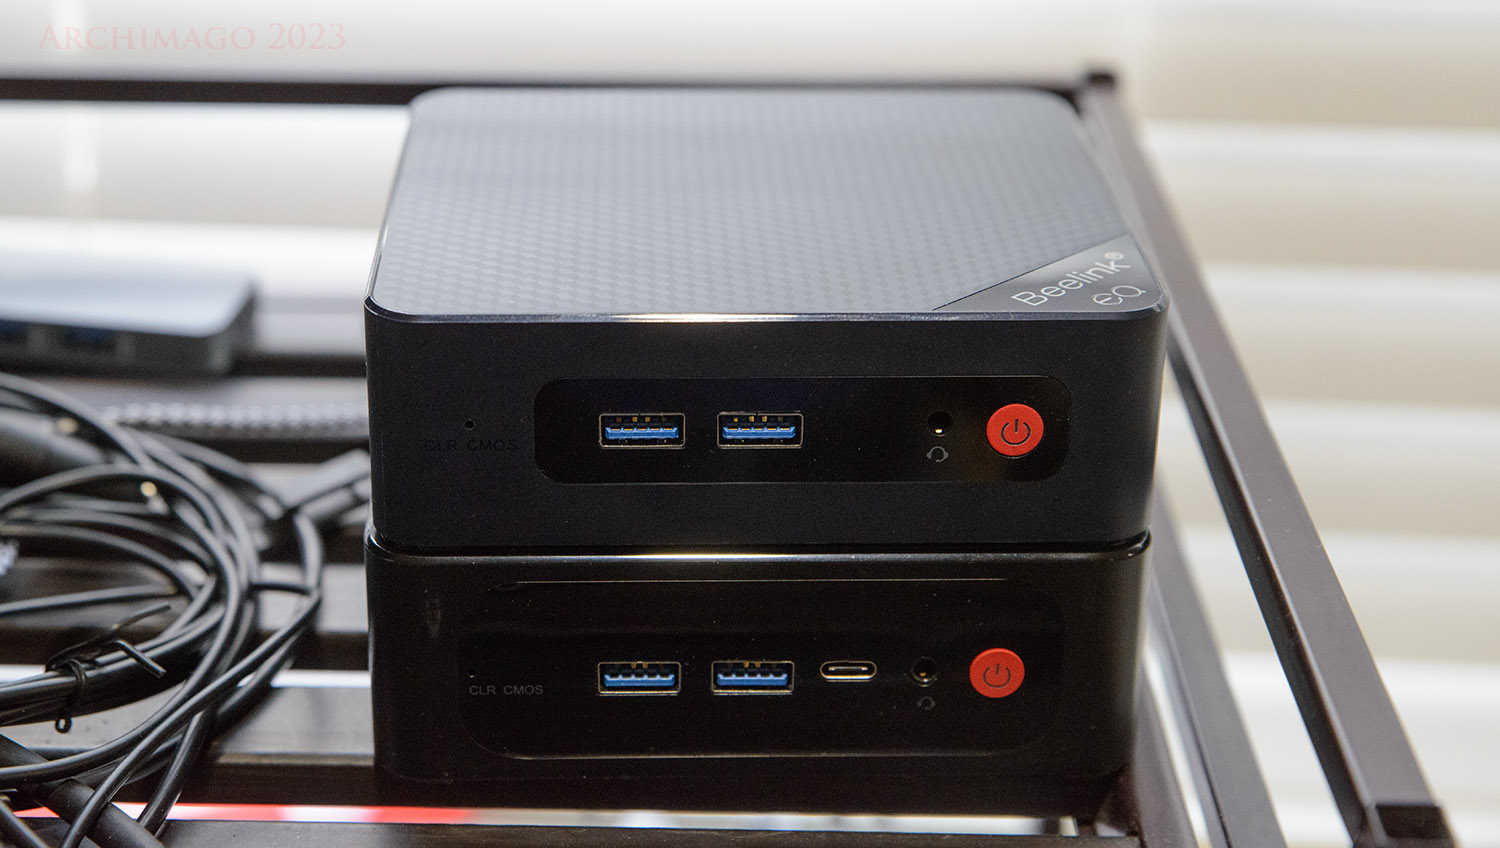 Beelink EQ12 mini PC Review and more